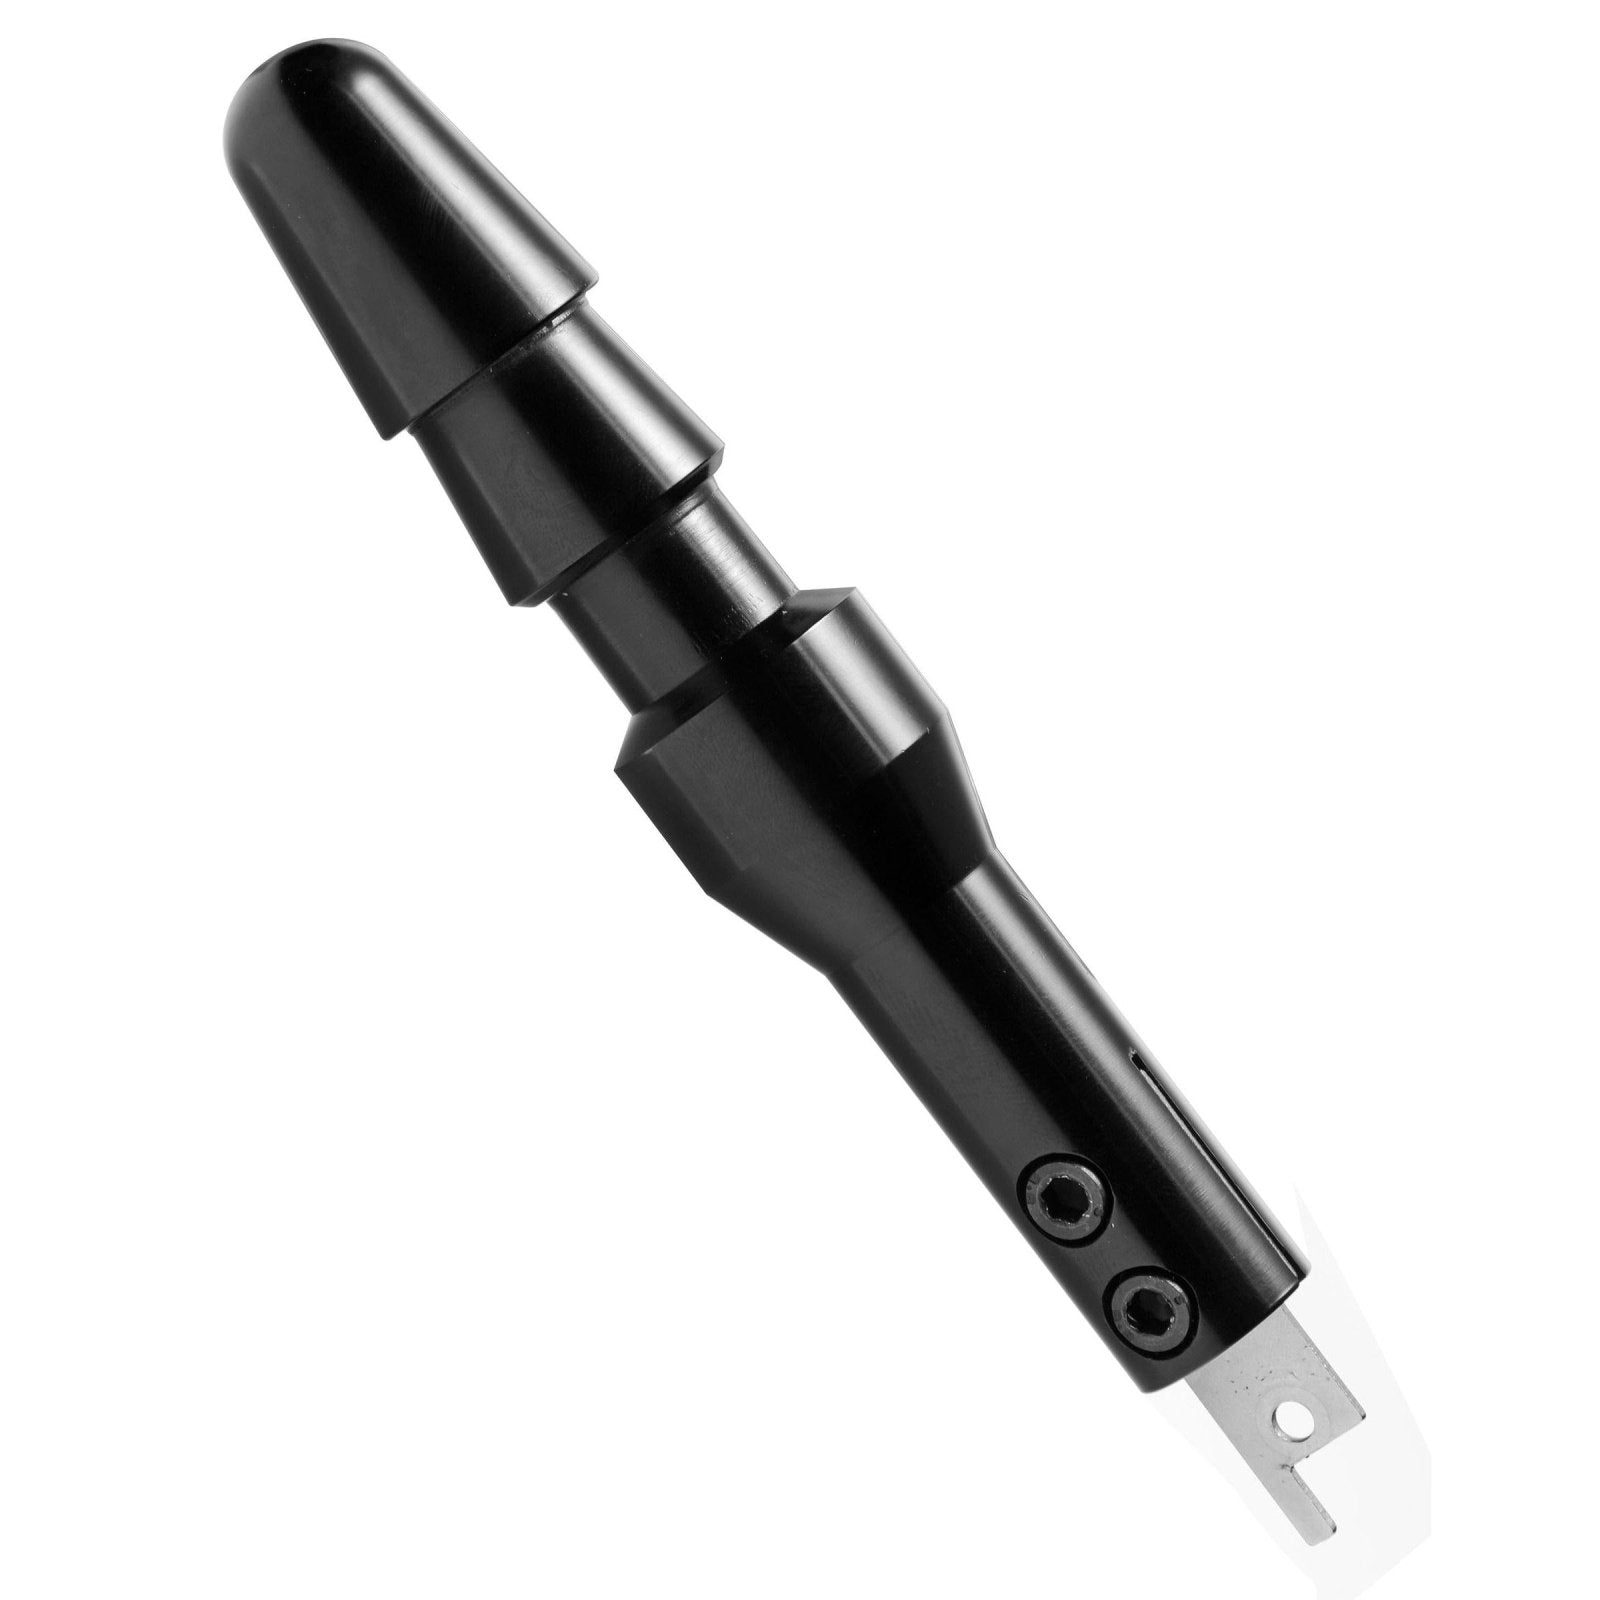 The Fucking Adapter Plus - Vac-U-Lock Reciprocating Saw Adapter with Dildo - Kink Store